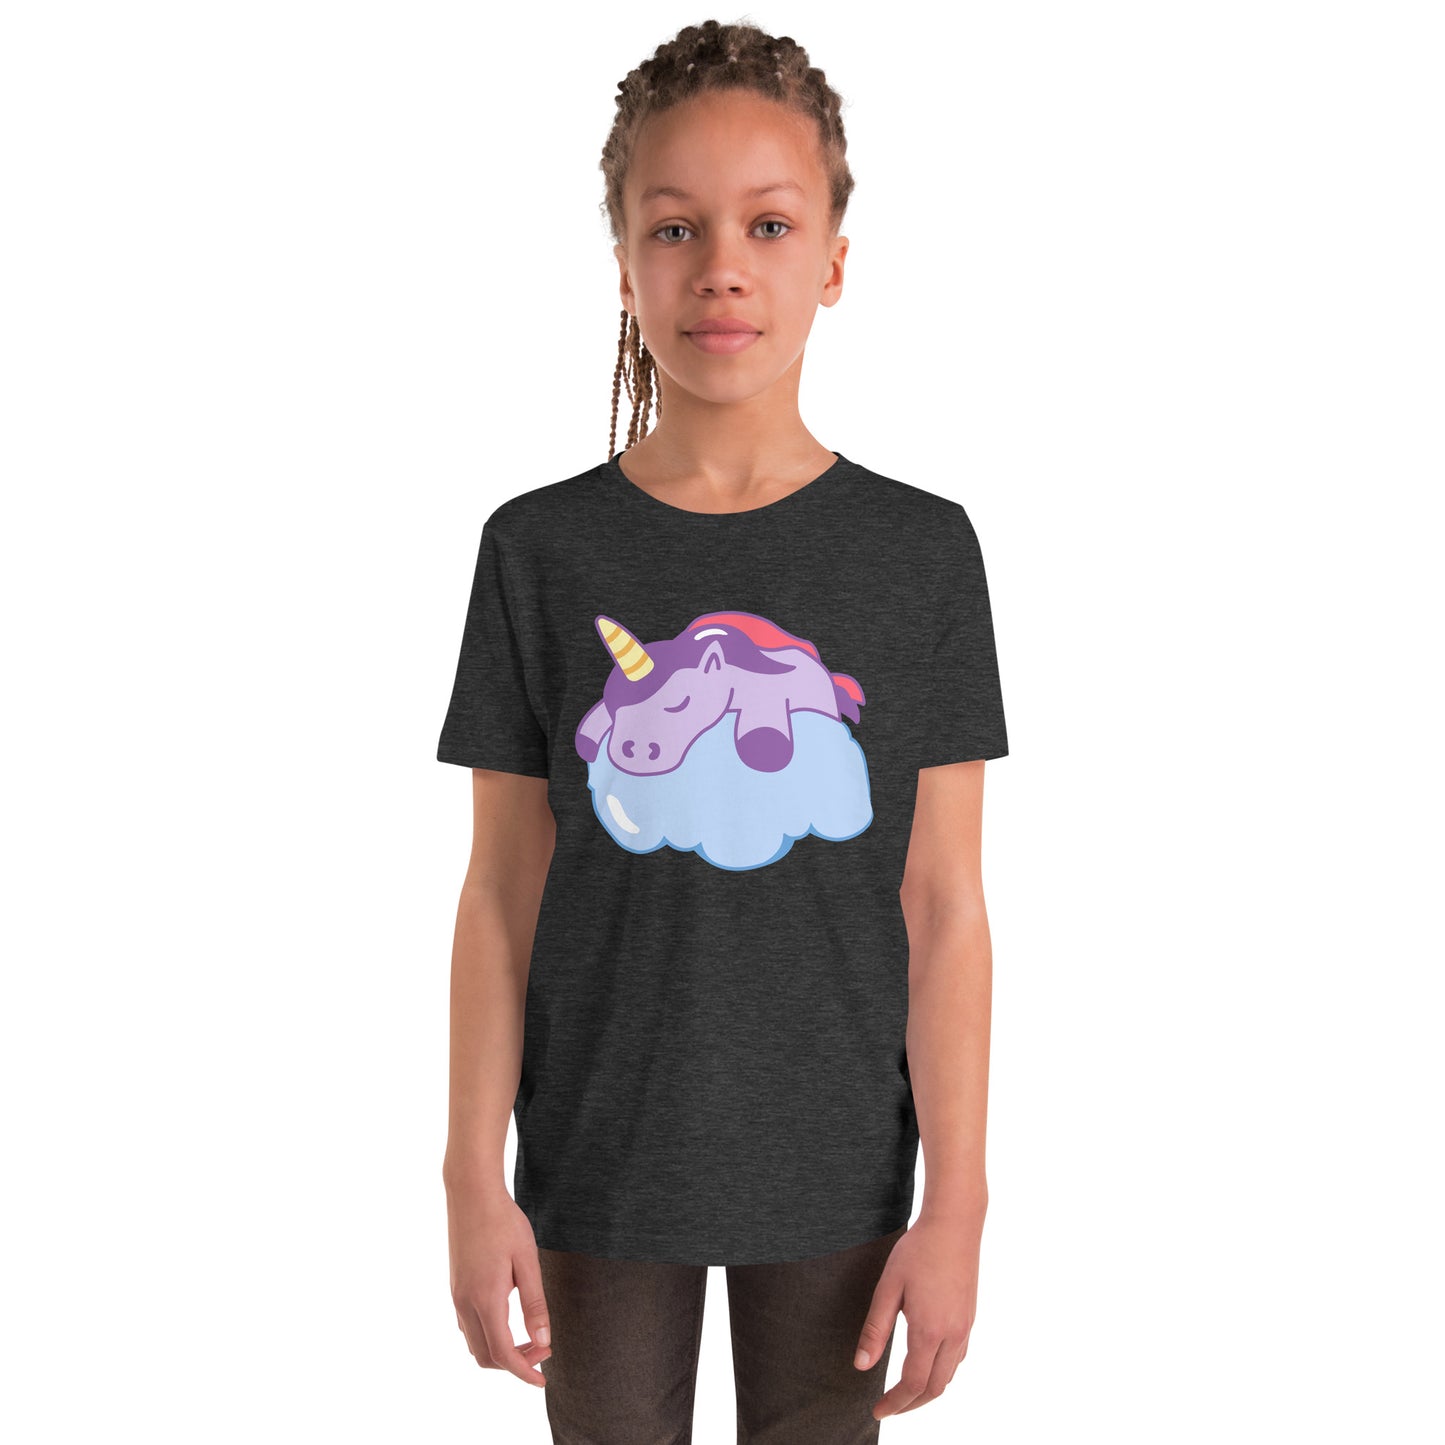 Youth with a dark grey T-shirt with a print of a sleeping unicorn on a cloud